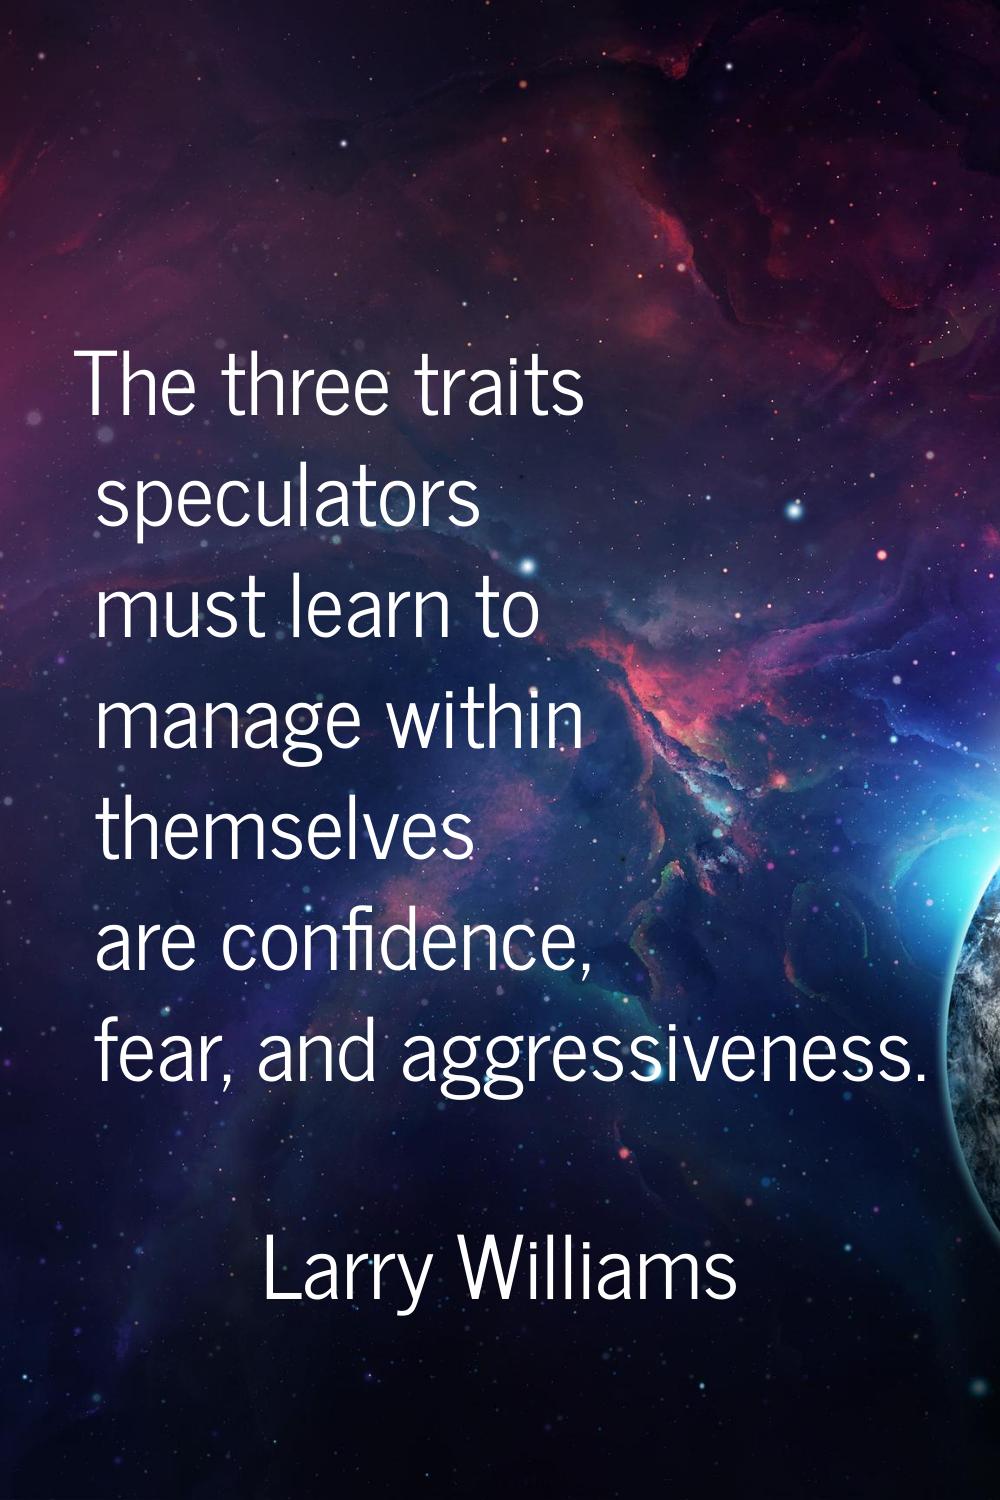 The three traits speculators must learn to manage within themselves are confidence, fear, and aggre